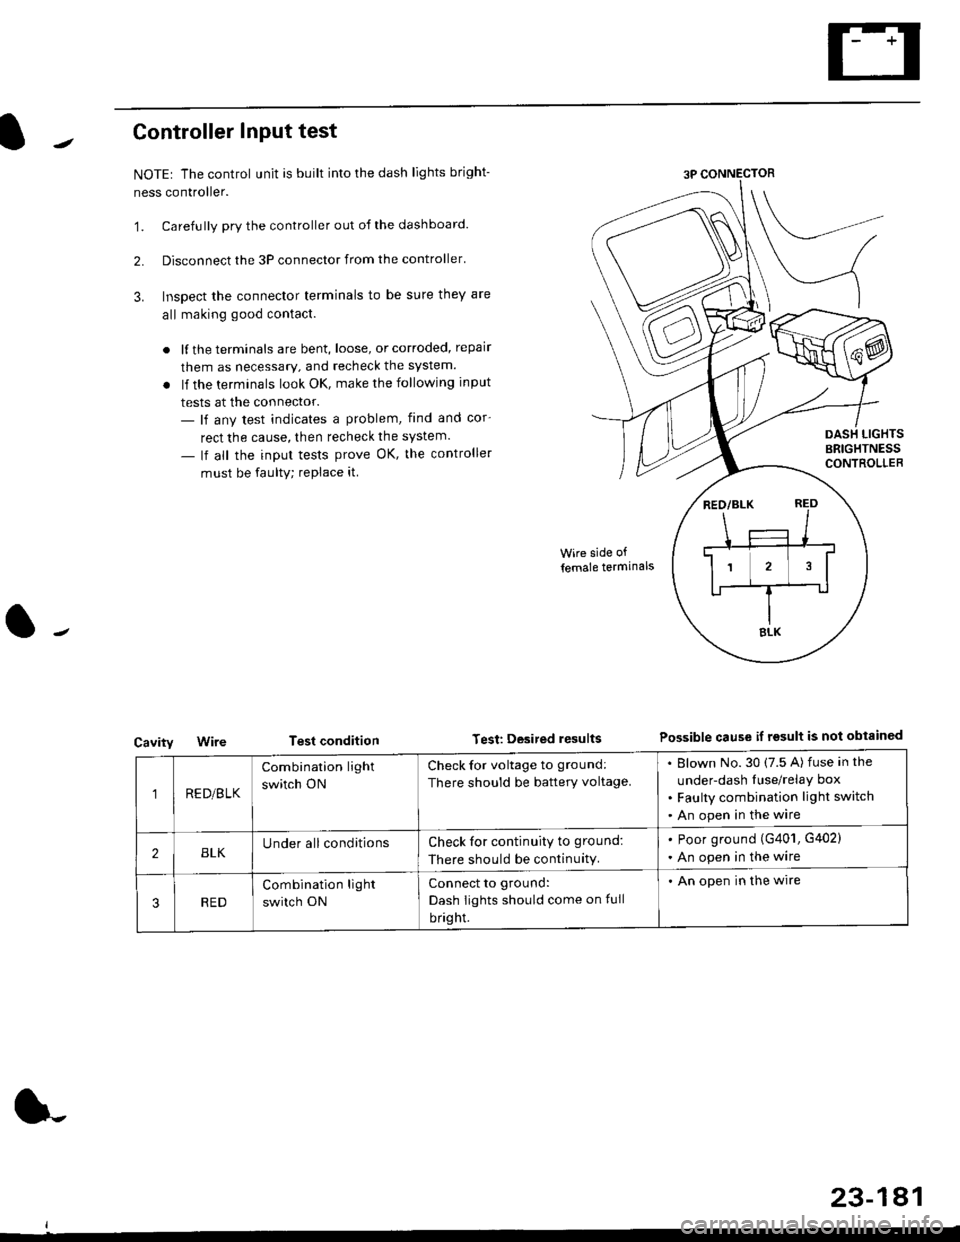 HONDA CIVIC 1998 6.G Repair Manual Controller Input test
NOTEr The control unit is built into the dash lights bright-
ness controller.
1. Carefully pry the controller out of the dashboard.
2. Disconnect the 3P connector from the contr